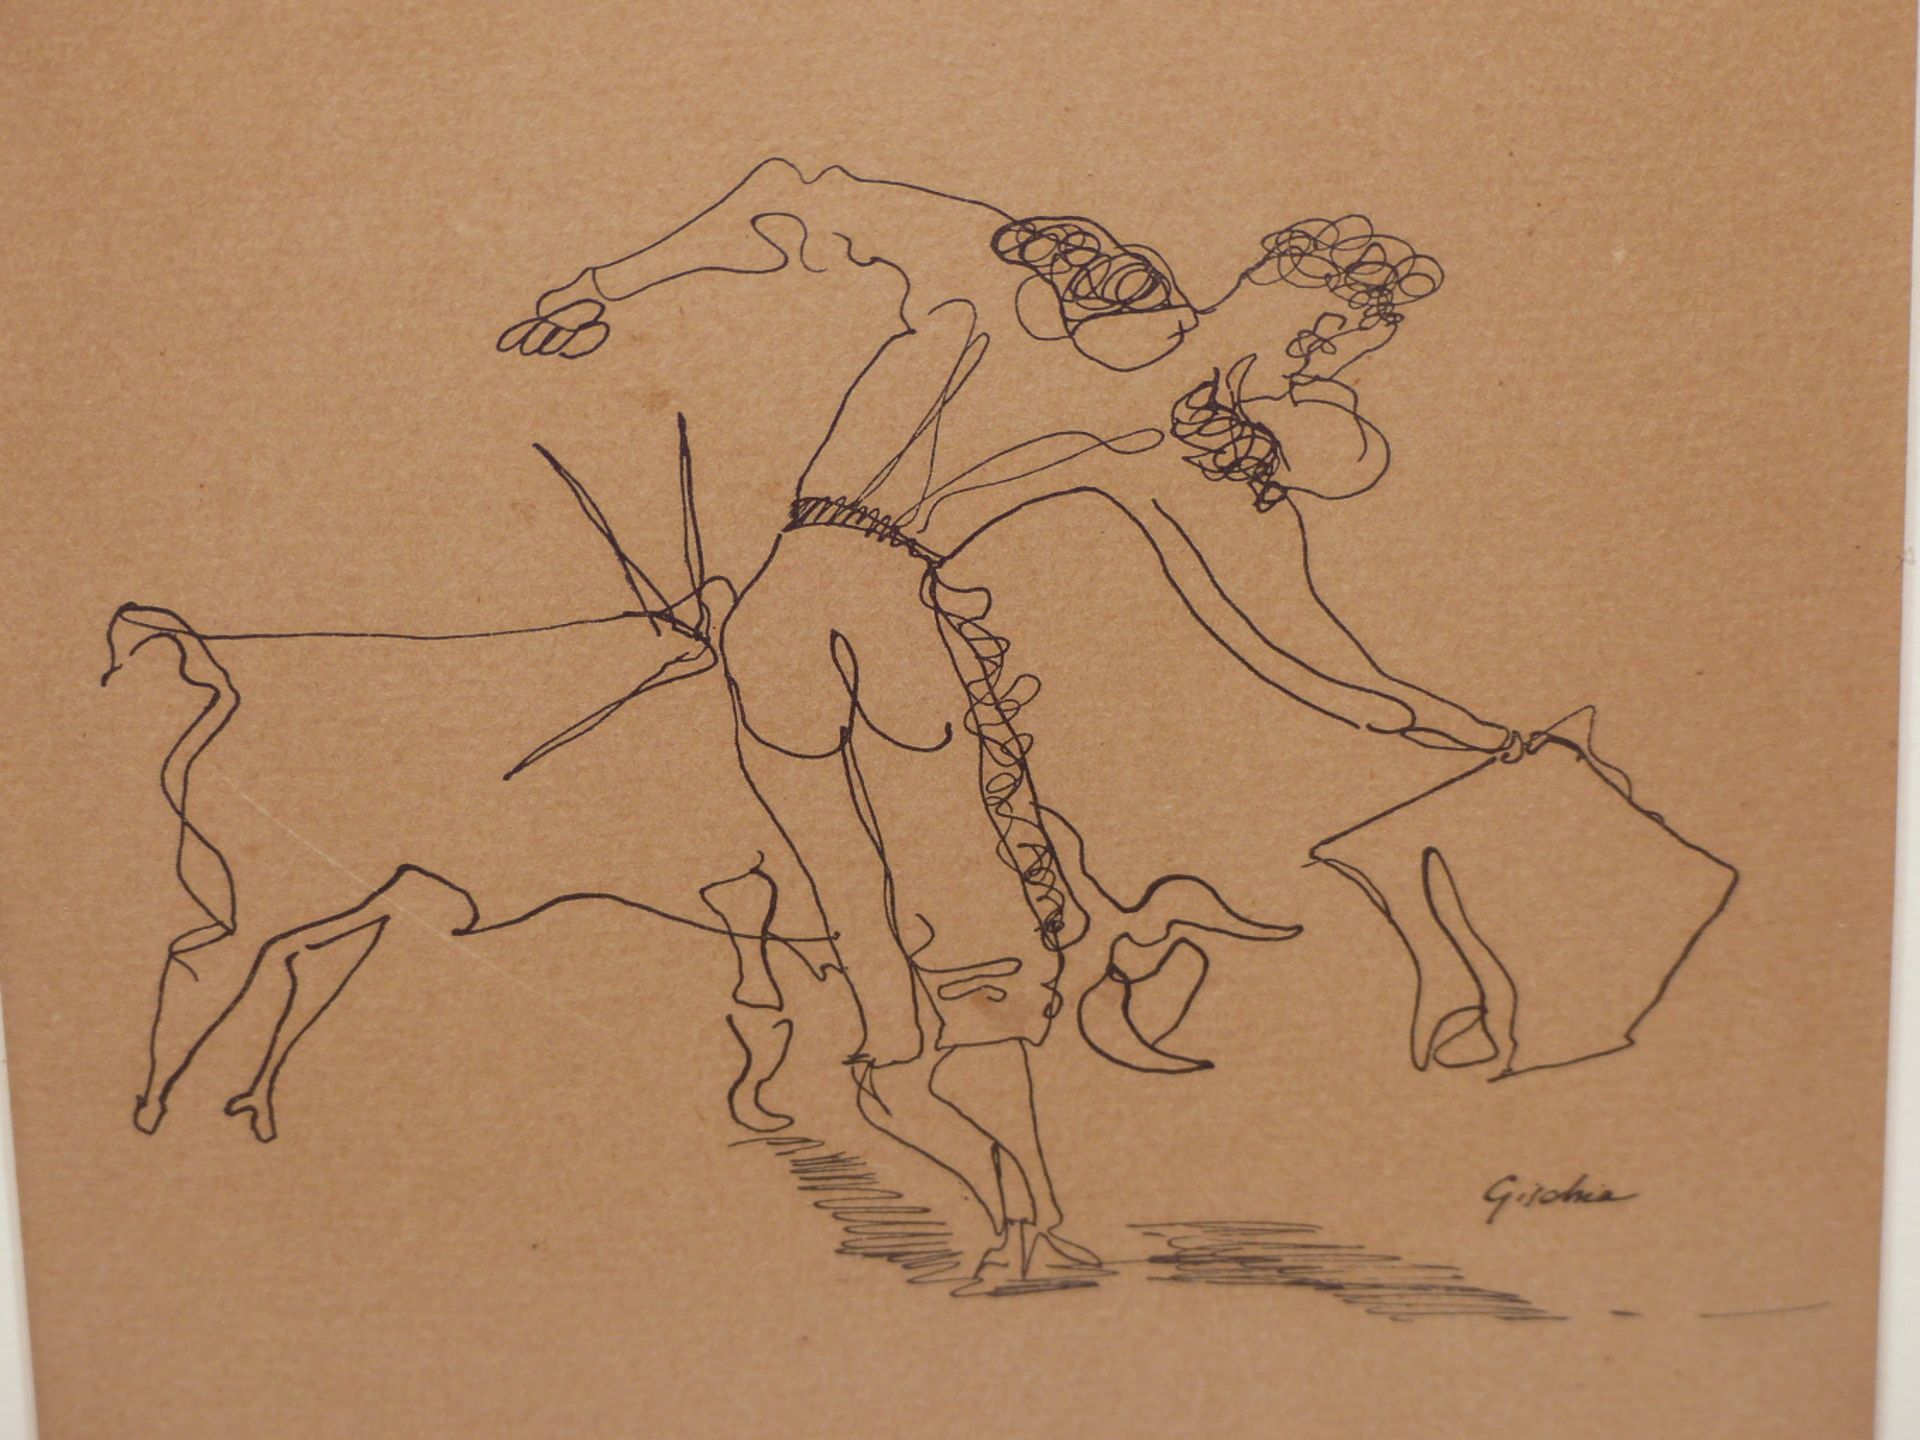 LEON GISCHIA, FRENCH 1903-1991, ABSTRACT PORTRAYAL OF THE BULL FIGHTER AND BULL. PEN AND INK - Image 2 of 4